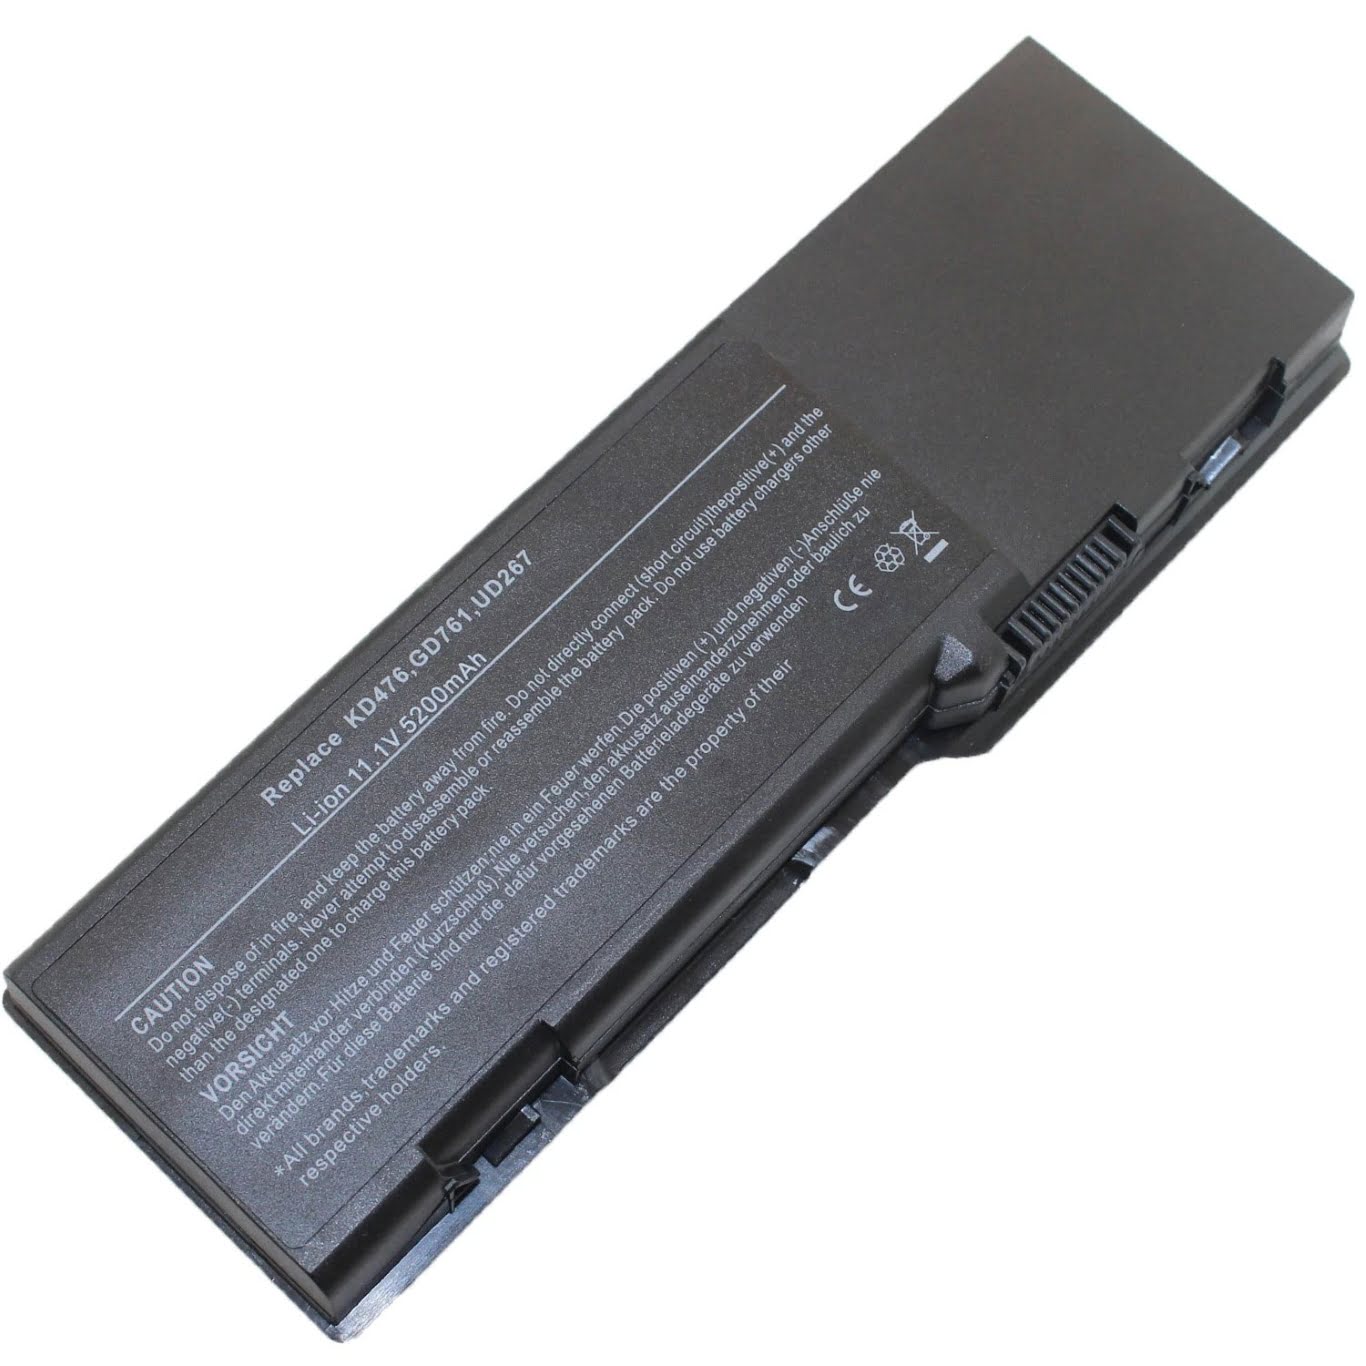 312-0461, 312-0466 replacement Laptop Battery for Dell Inspiron 1501, Inspiron 6400, 11.1V, 4400mAh